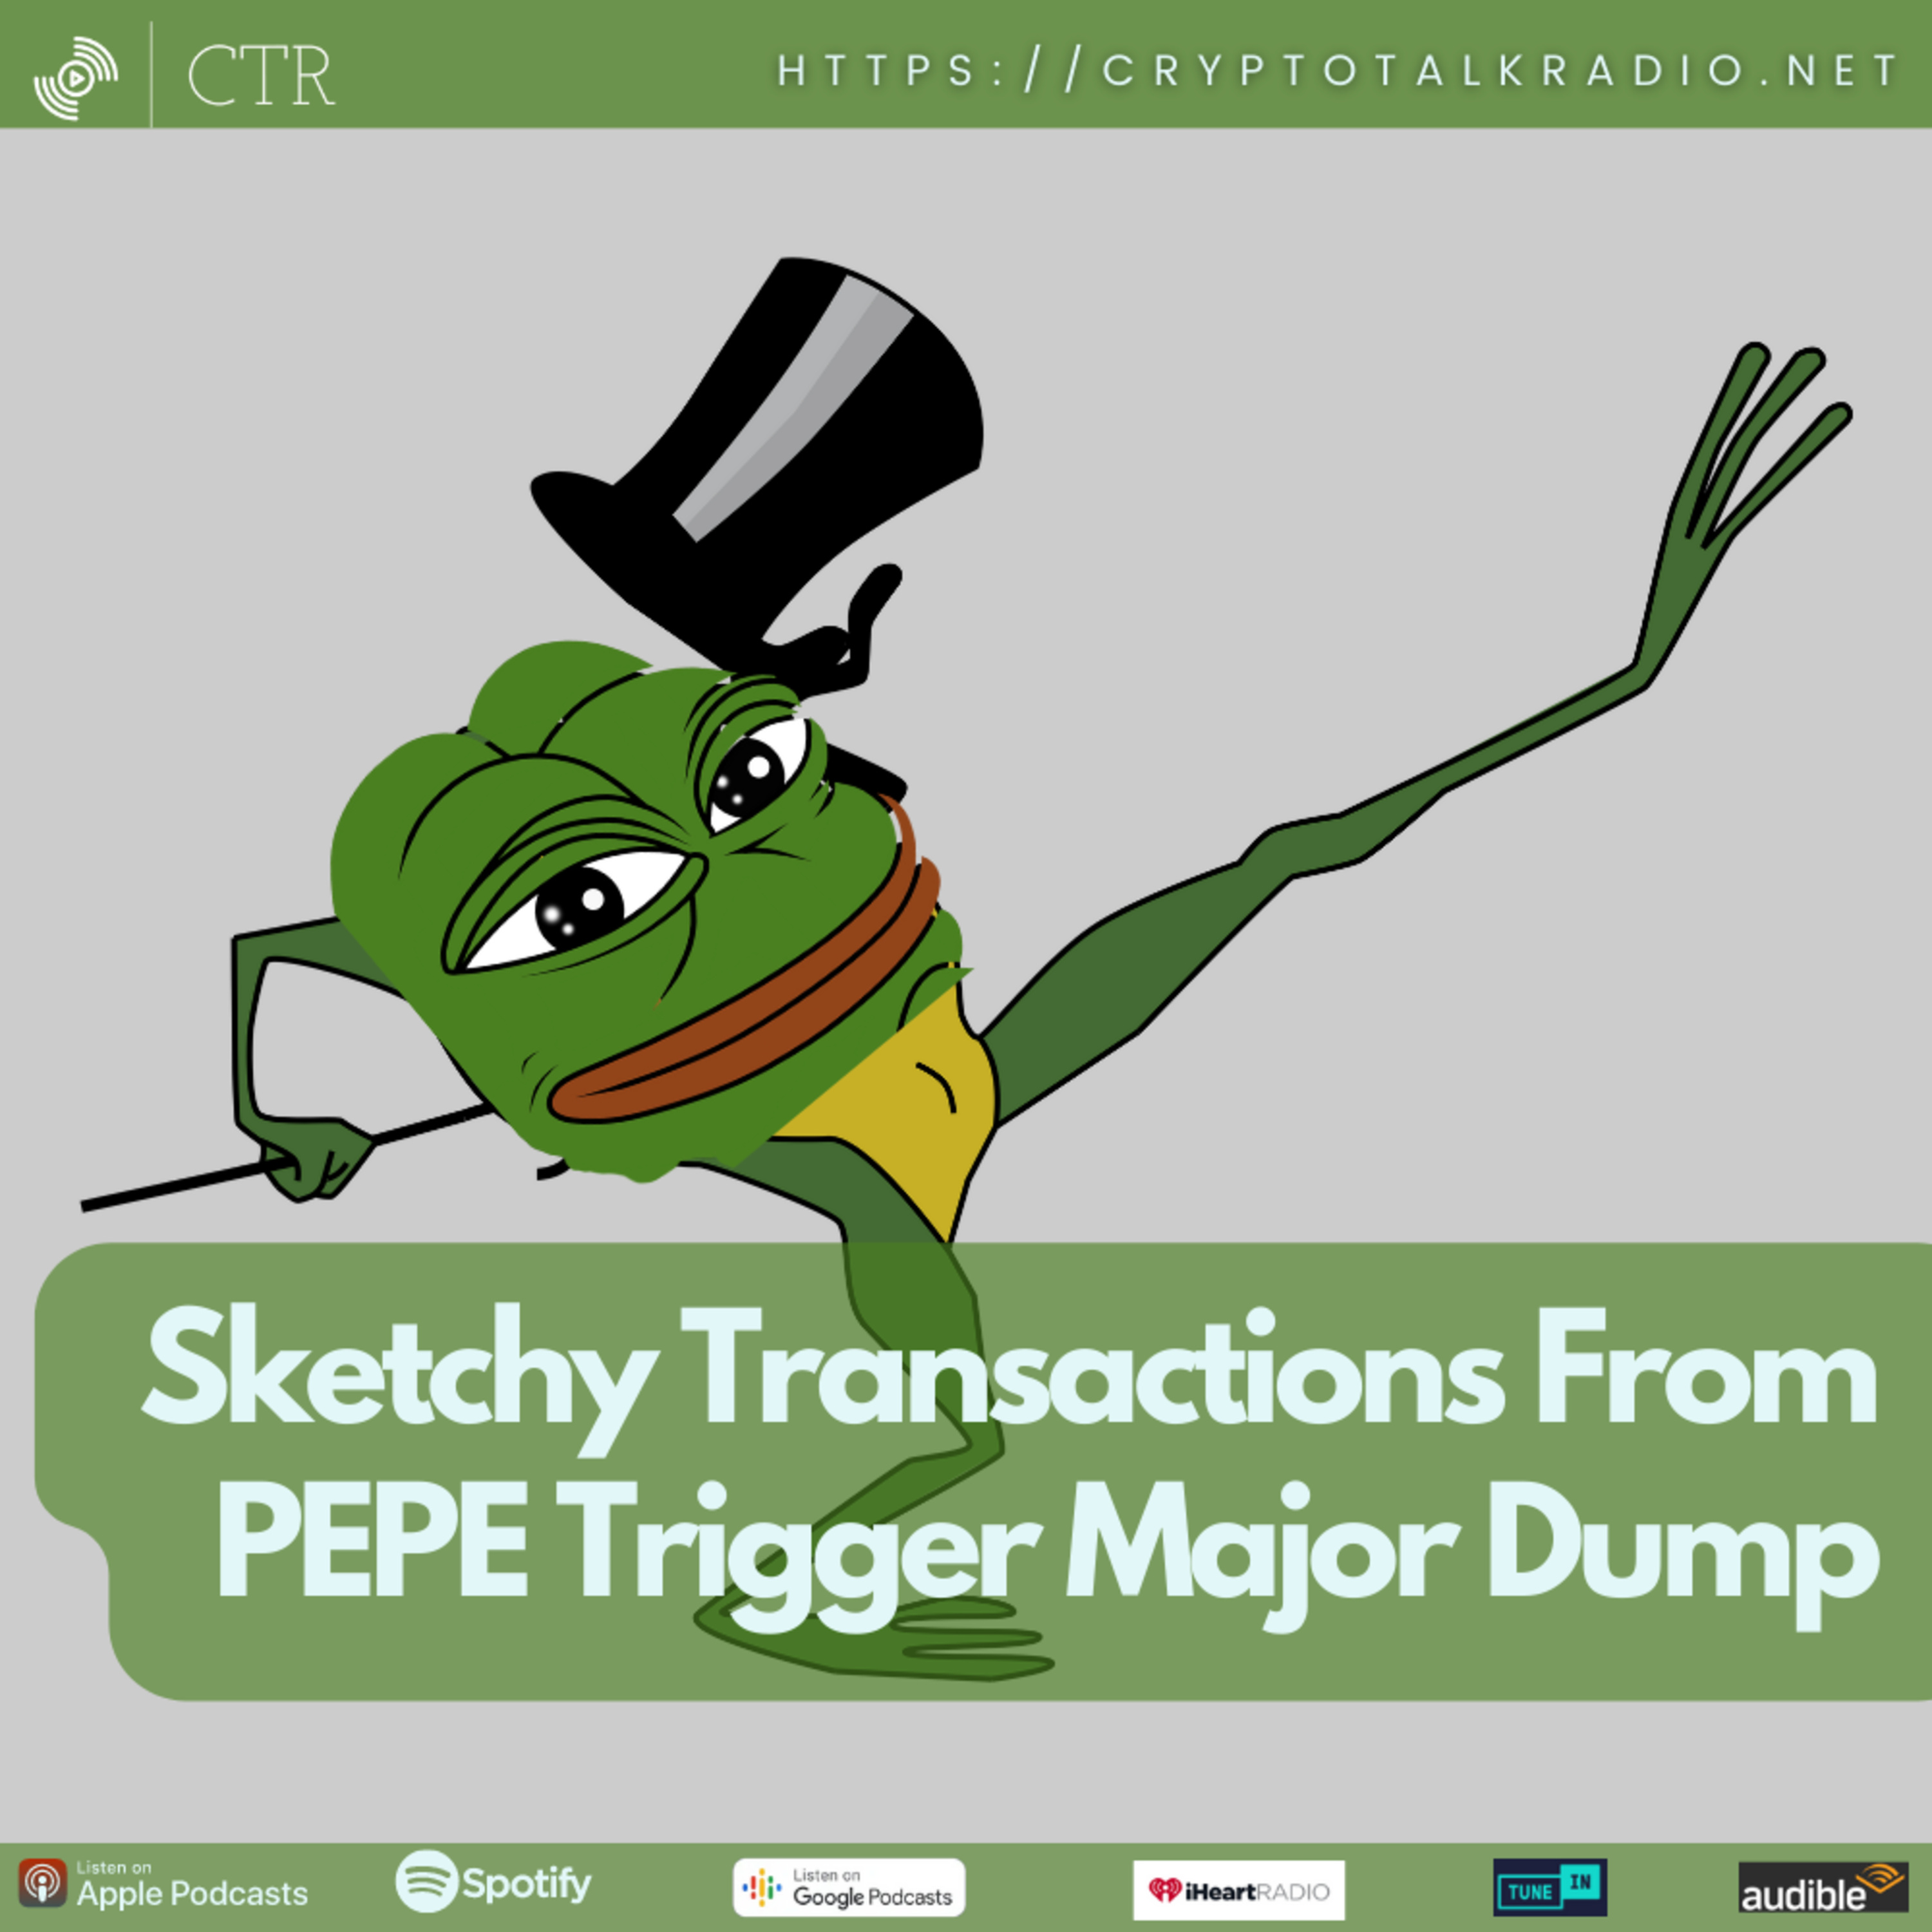 Sketchy Transactions From #PEPE Trigger Major Dump